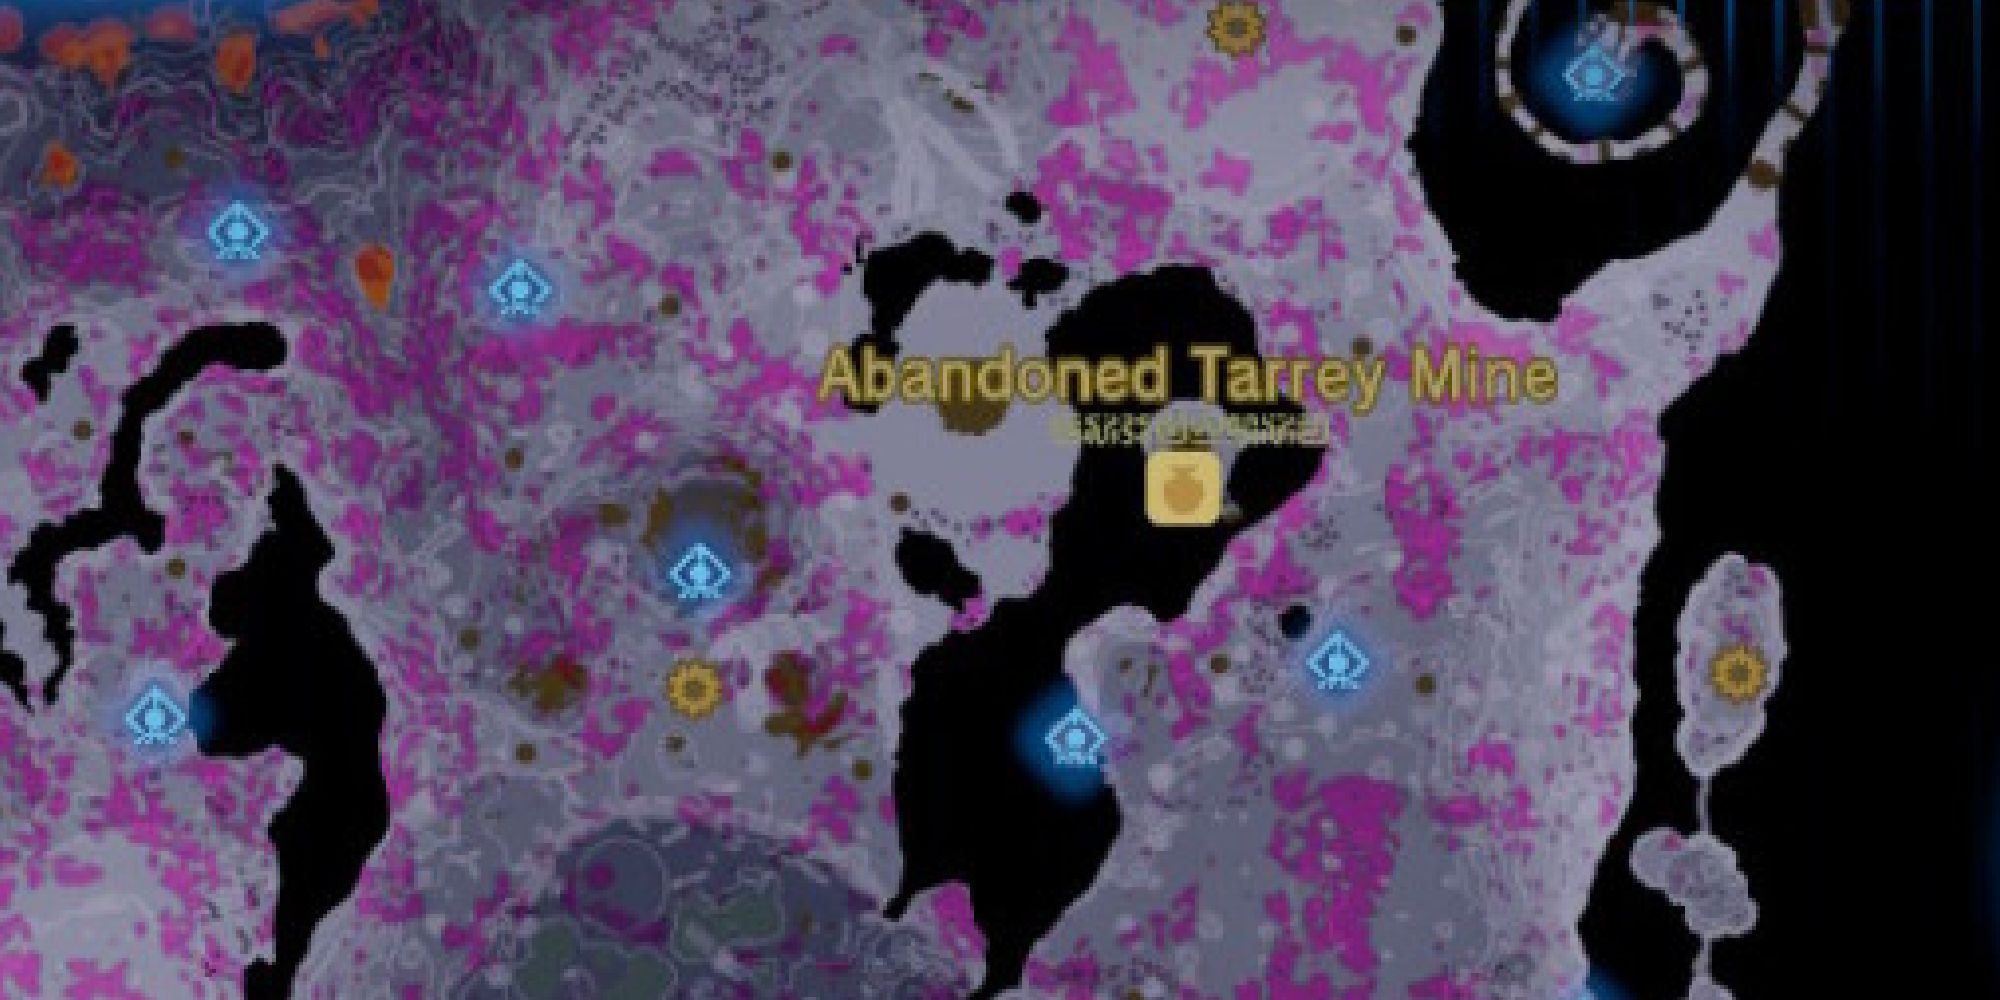 abandoned tarrey mine shown on map of the depths